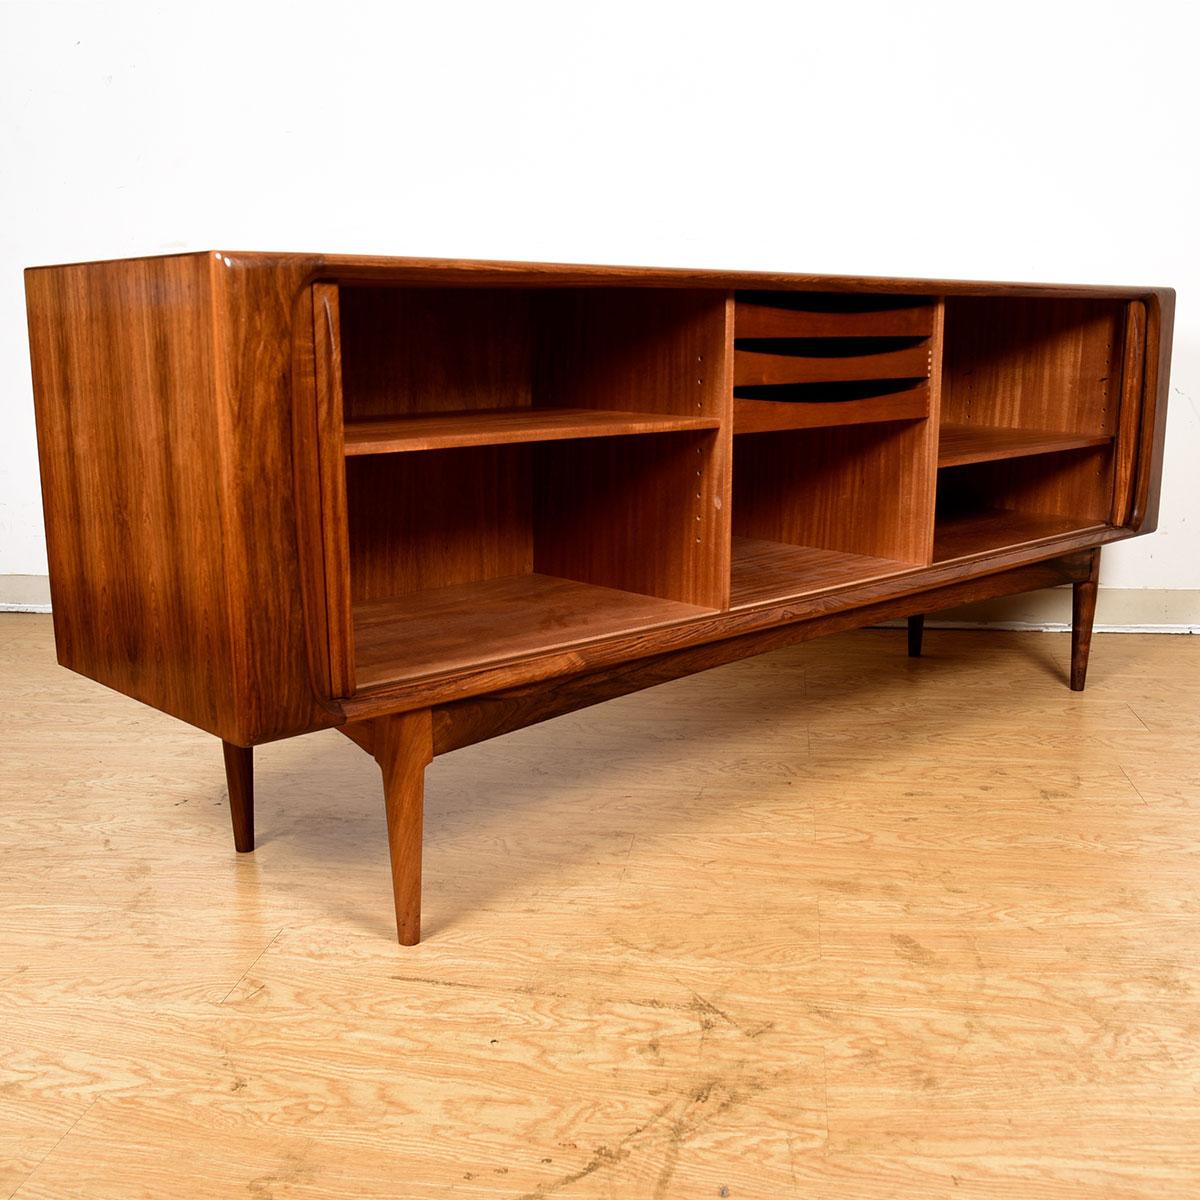 20th Century Tambour Door Credenza in Danish Modern Rosewood with Finished Backside